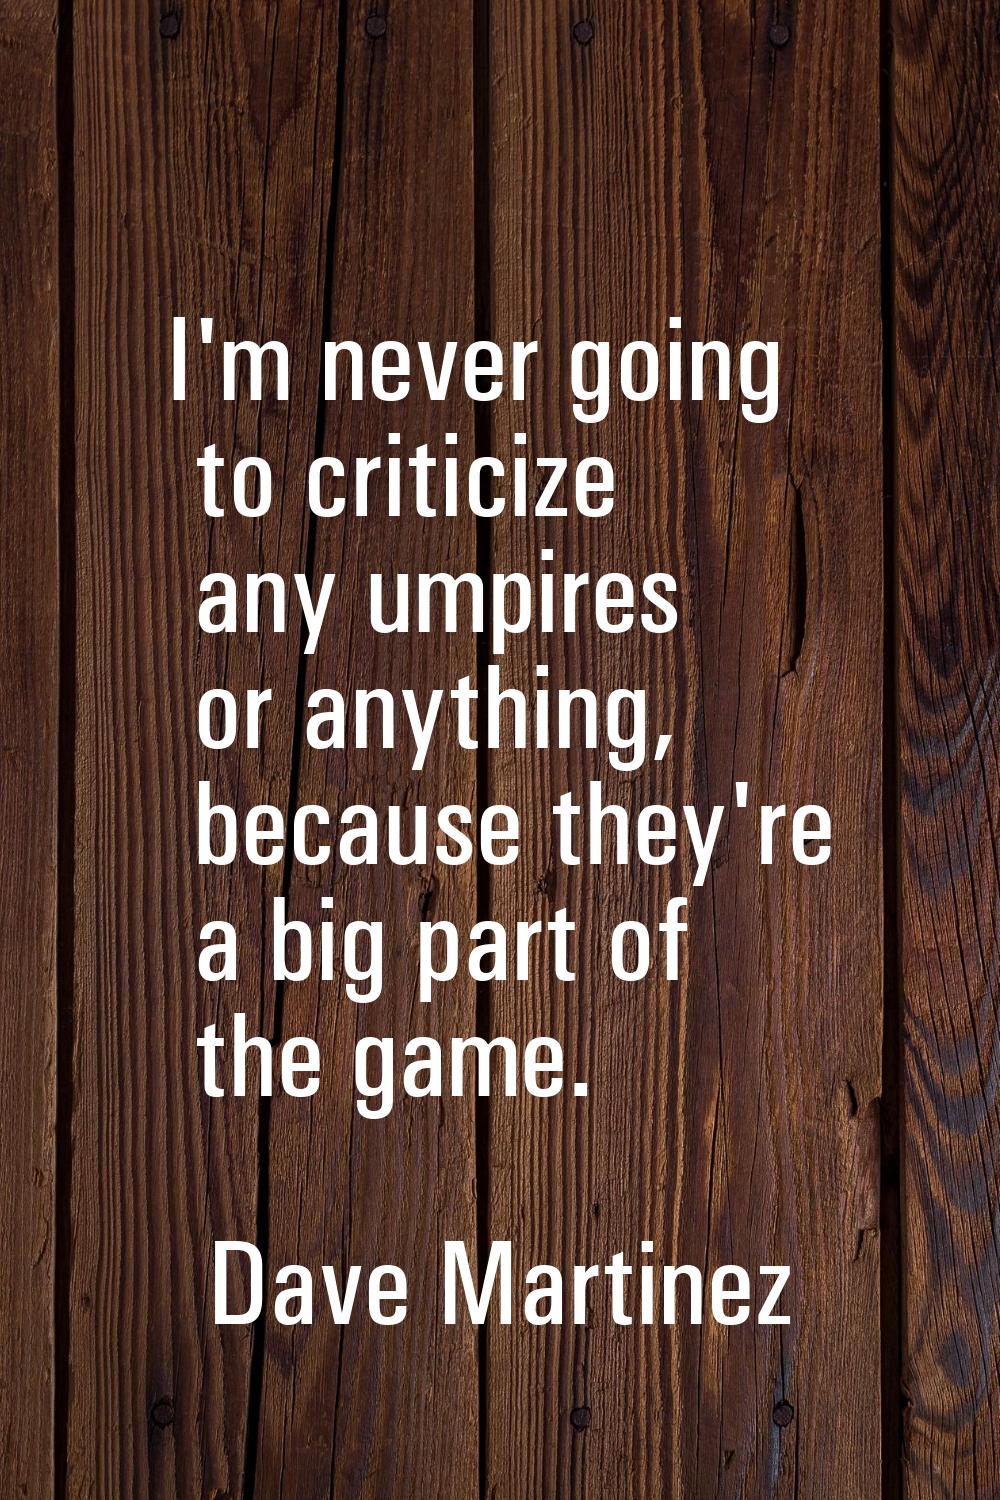 I'm never going to criticize any umpires or anything, because they're a big part of the game.